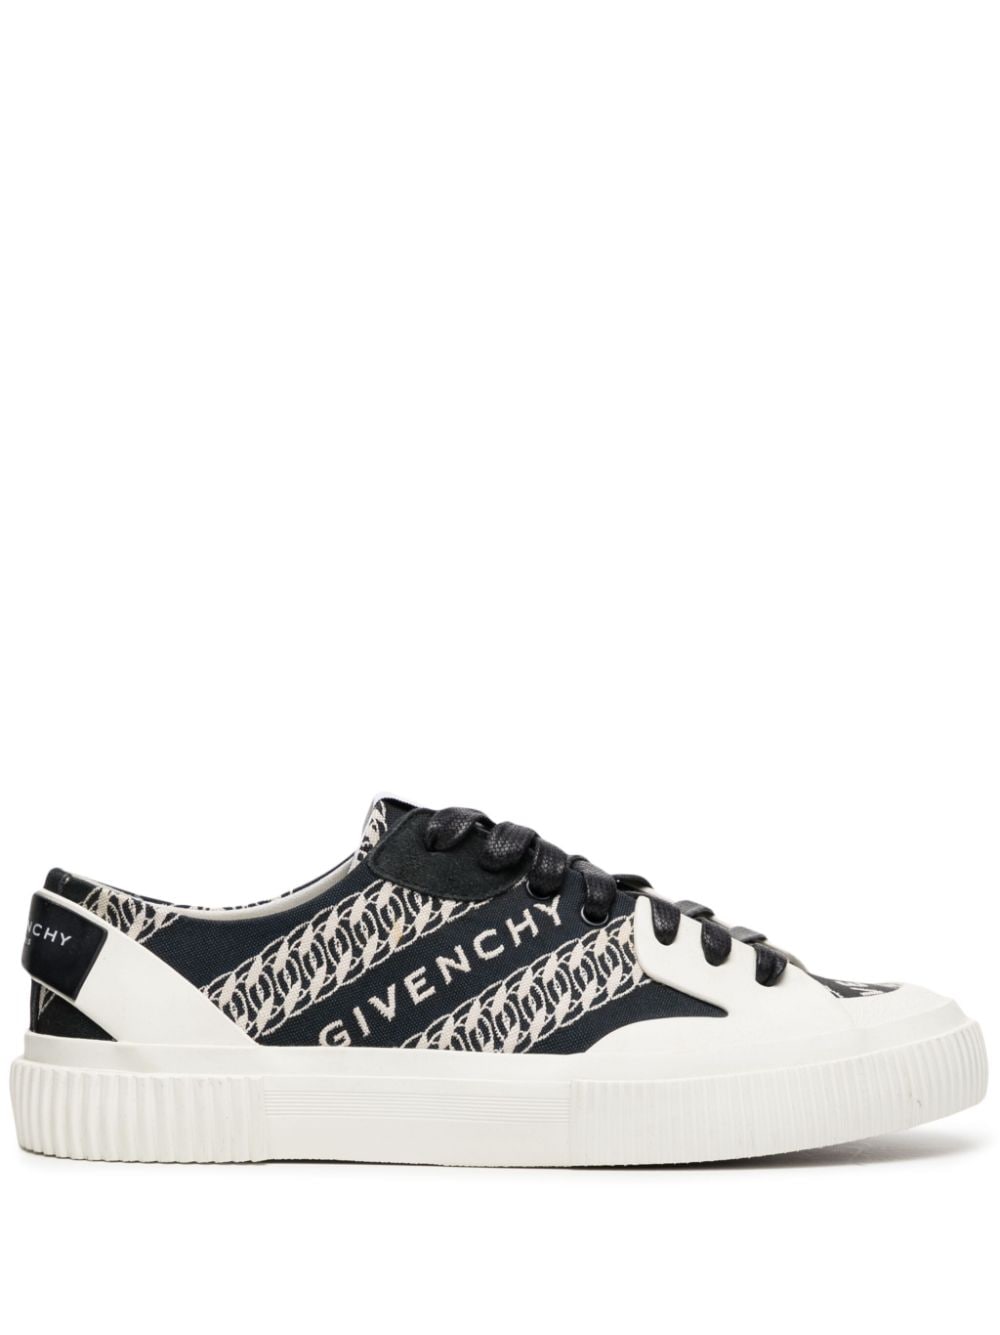 Givenchy logo-embroidered leather sneakers - Blue von Givenchy